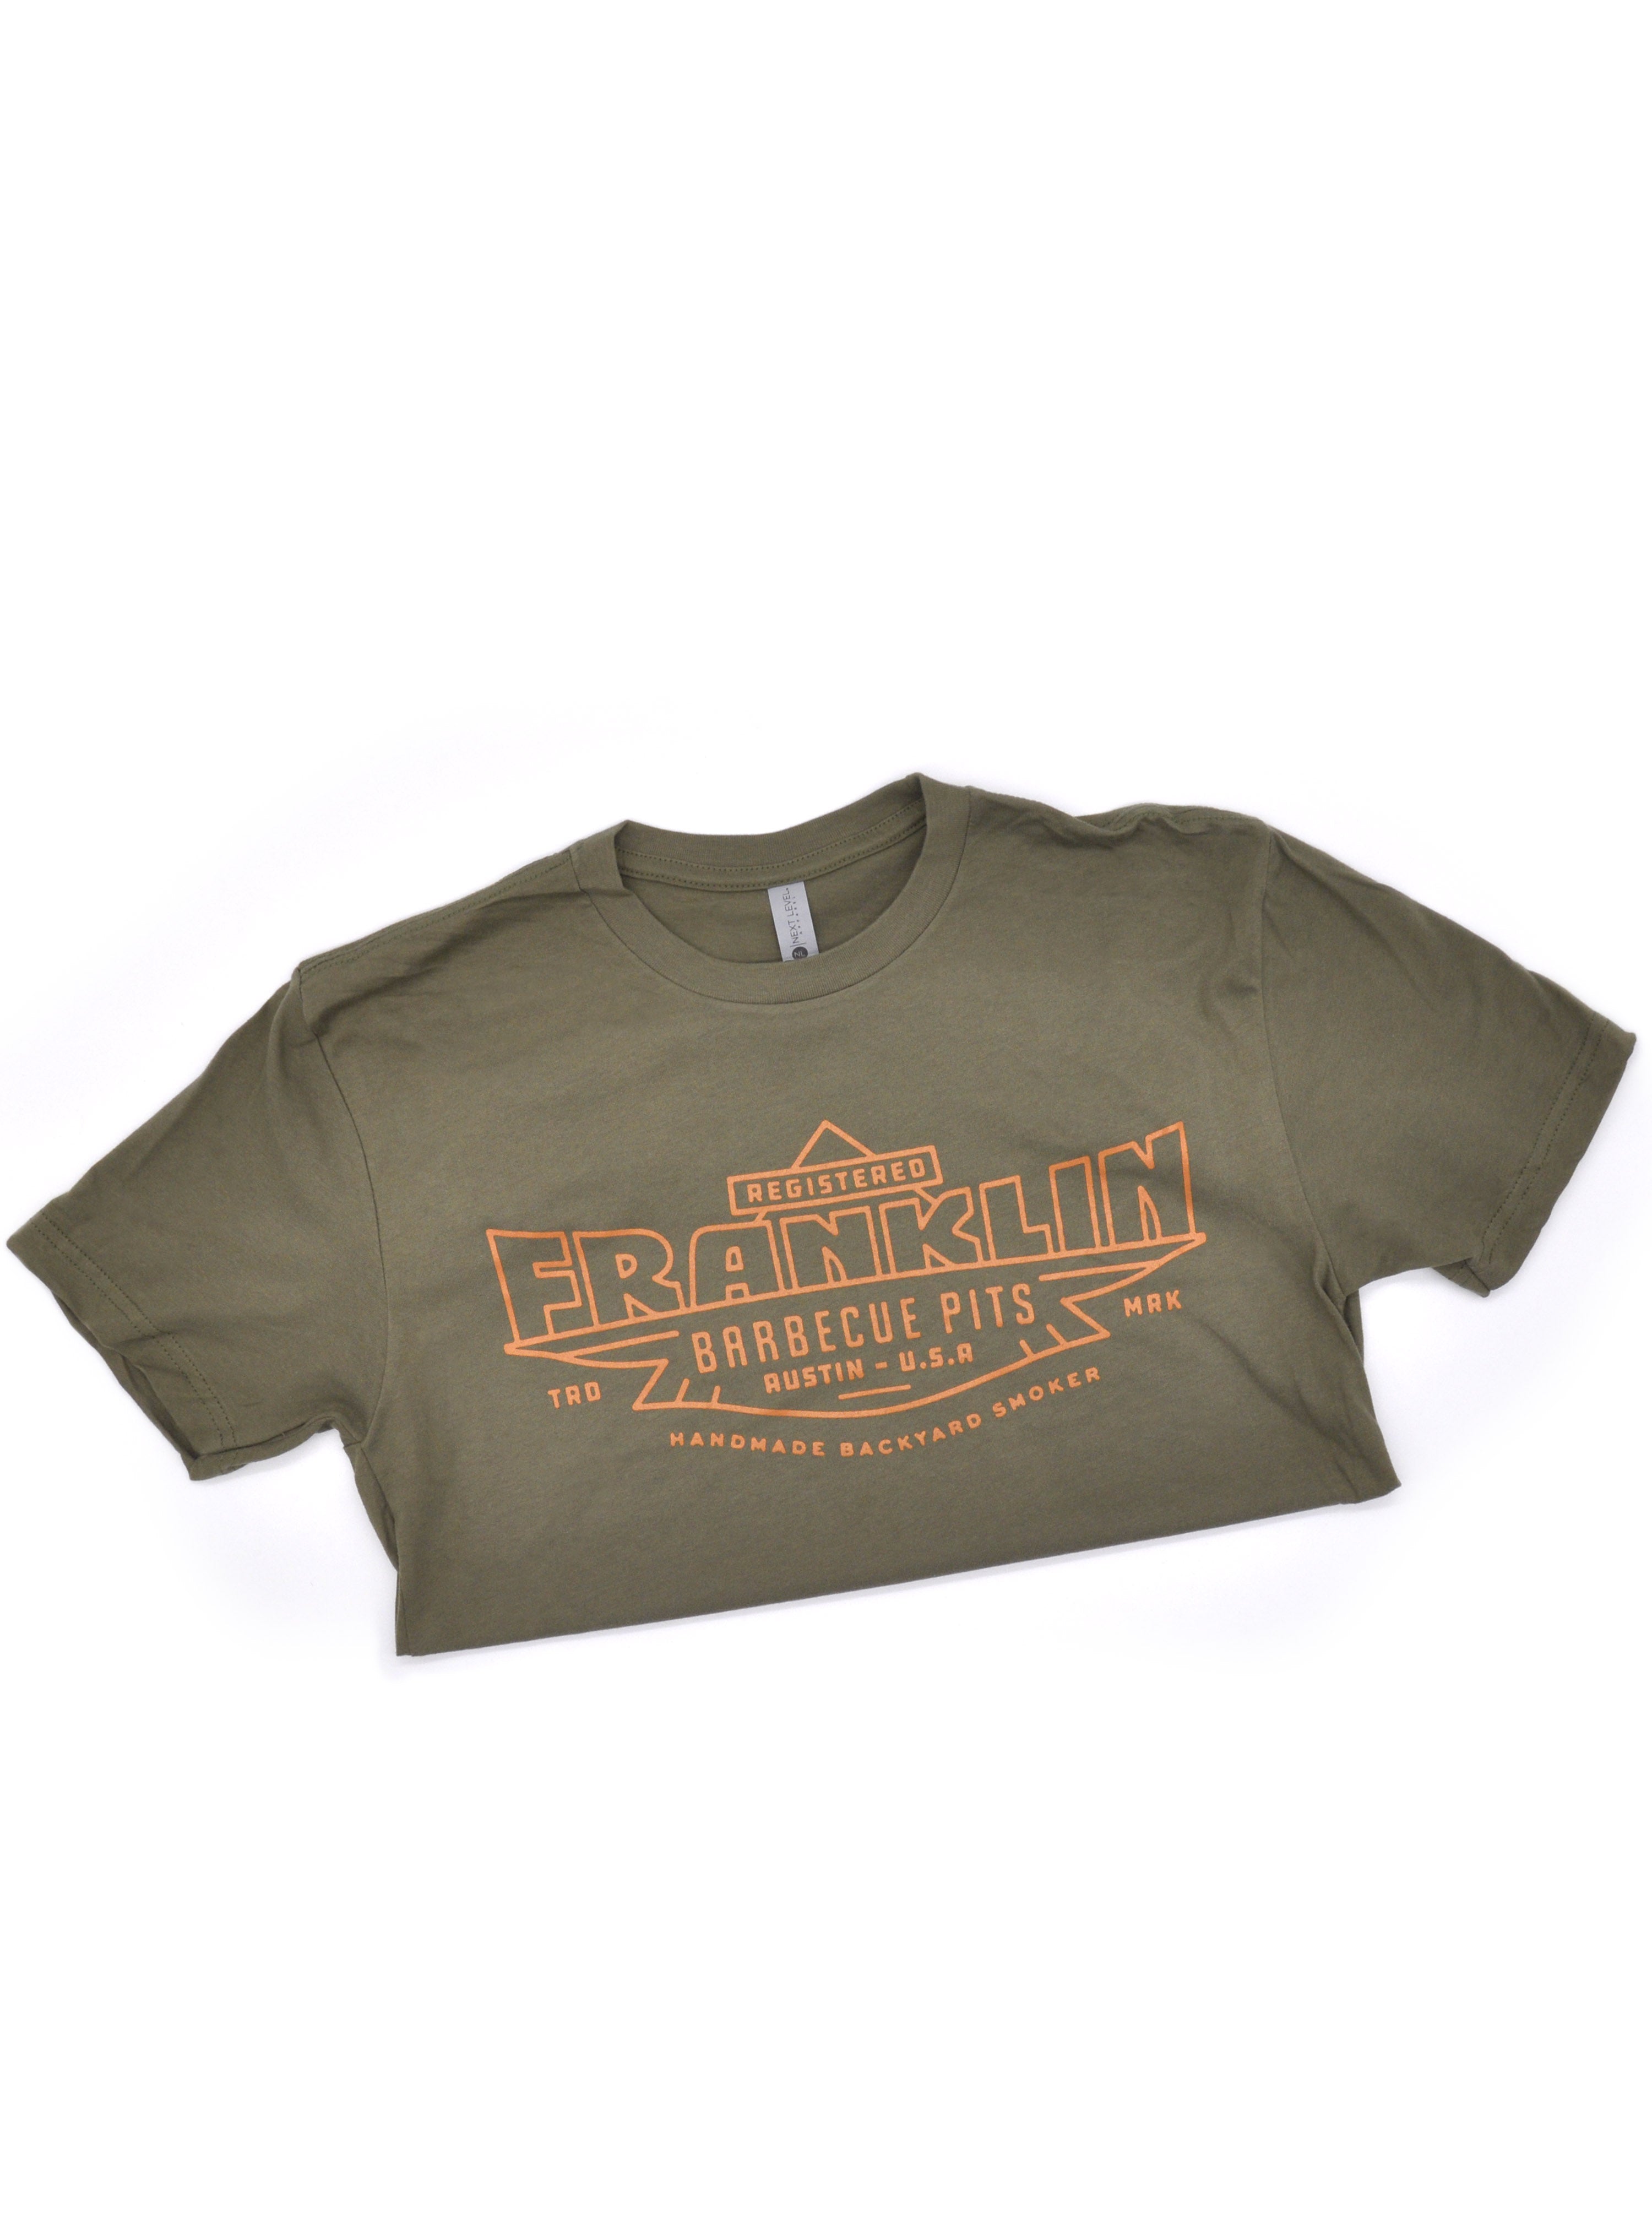 Army Green t-shirt with Registered Franklin Barbecue Pits logo in orange.